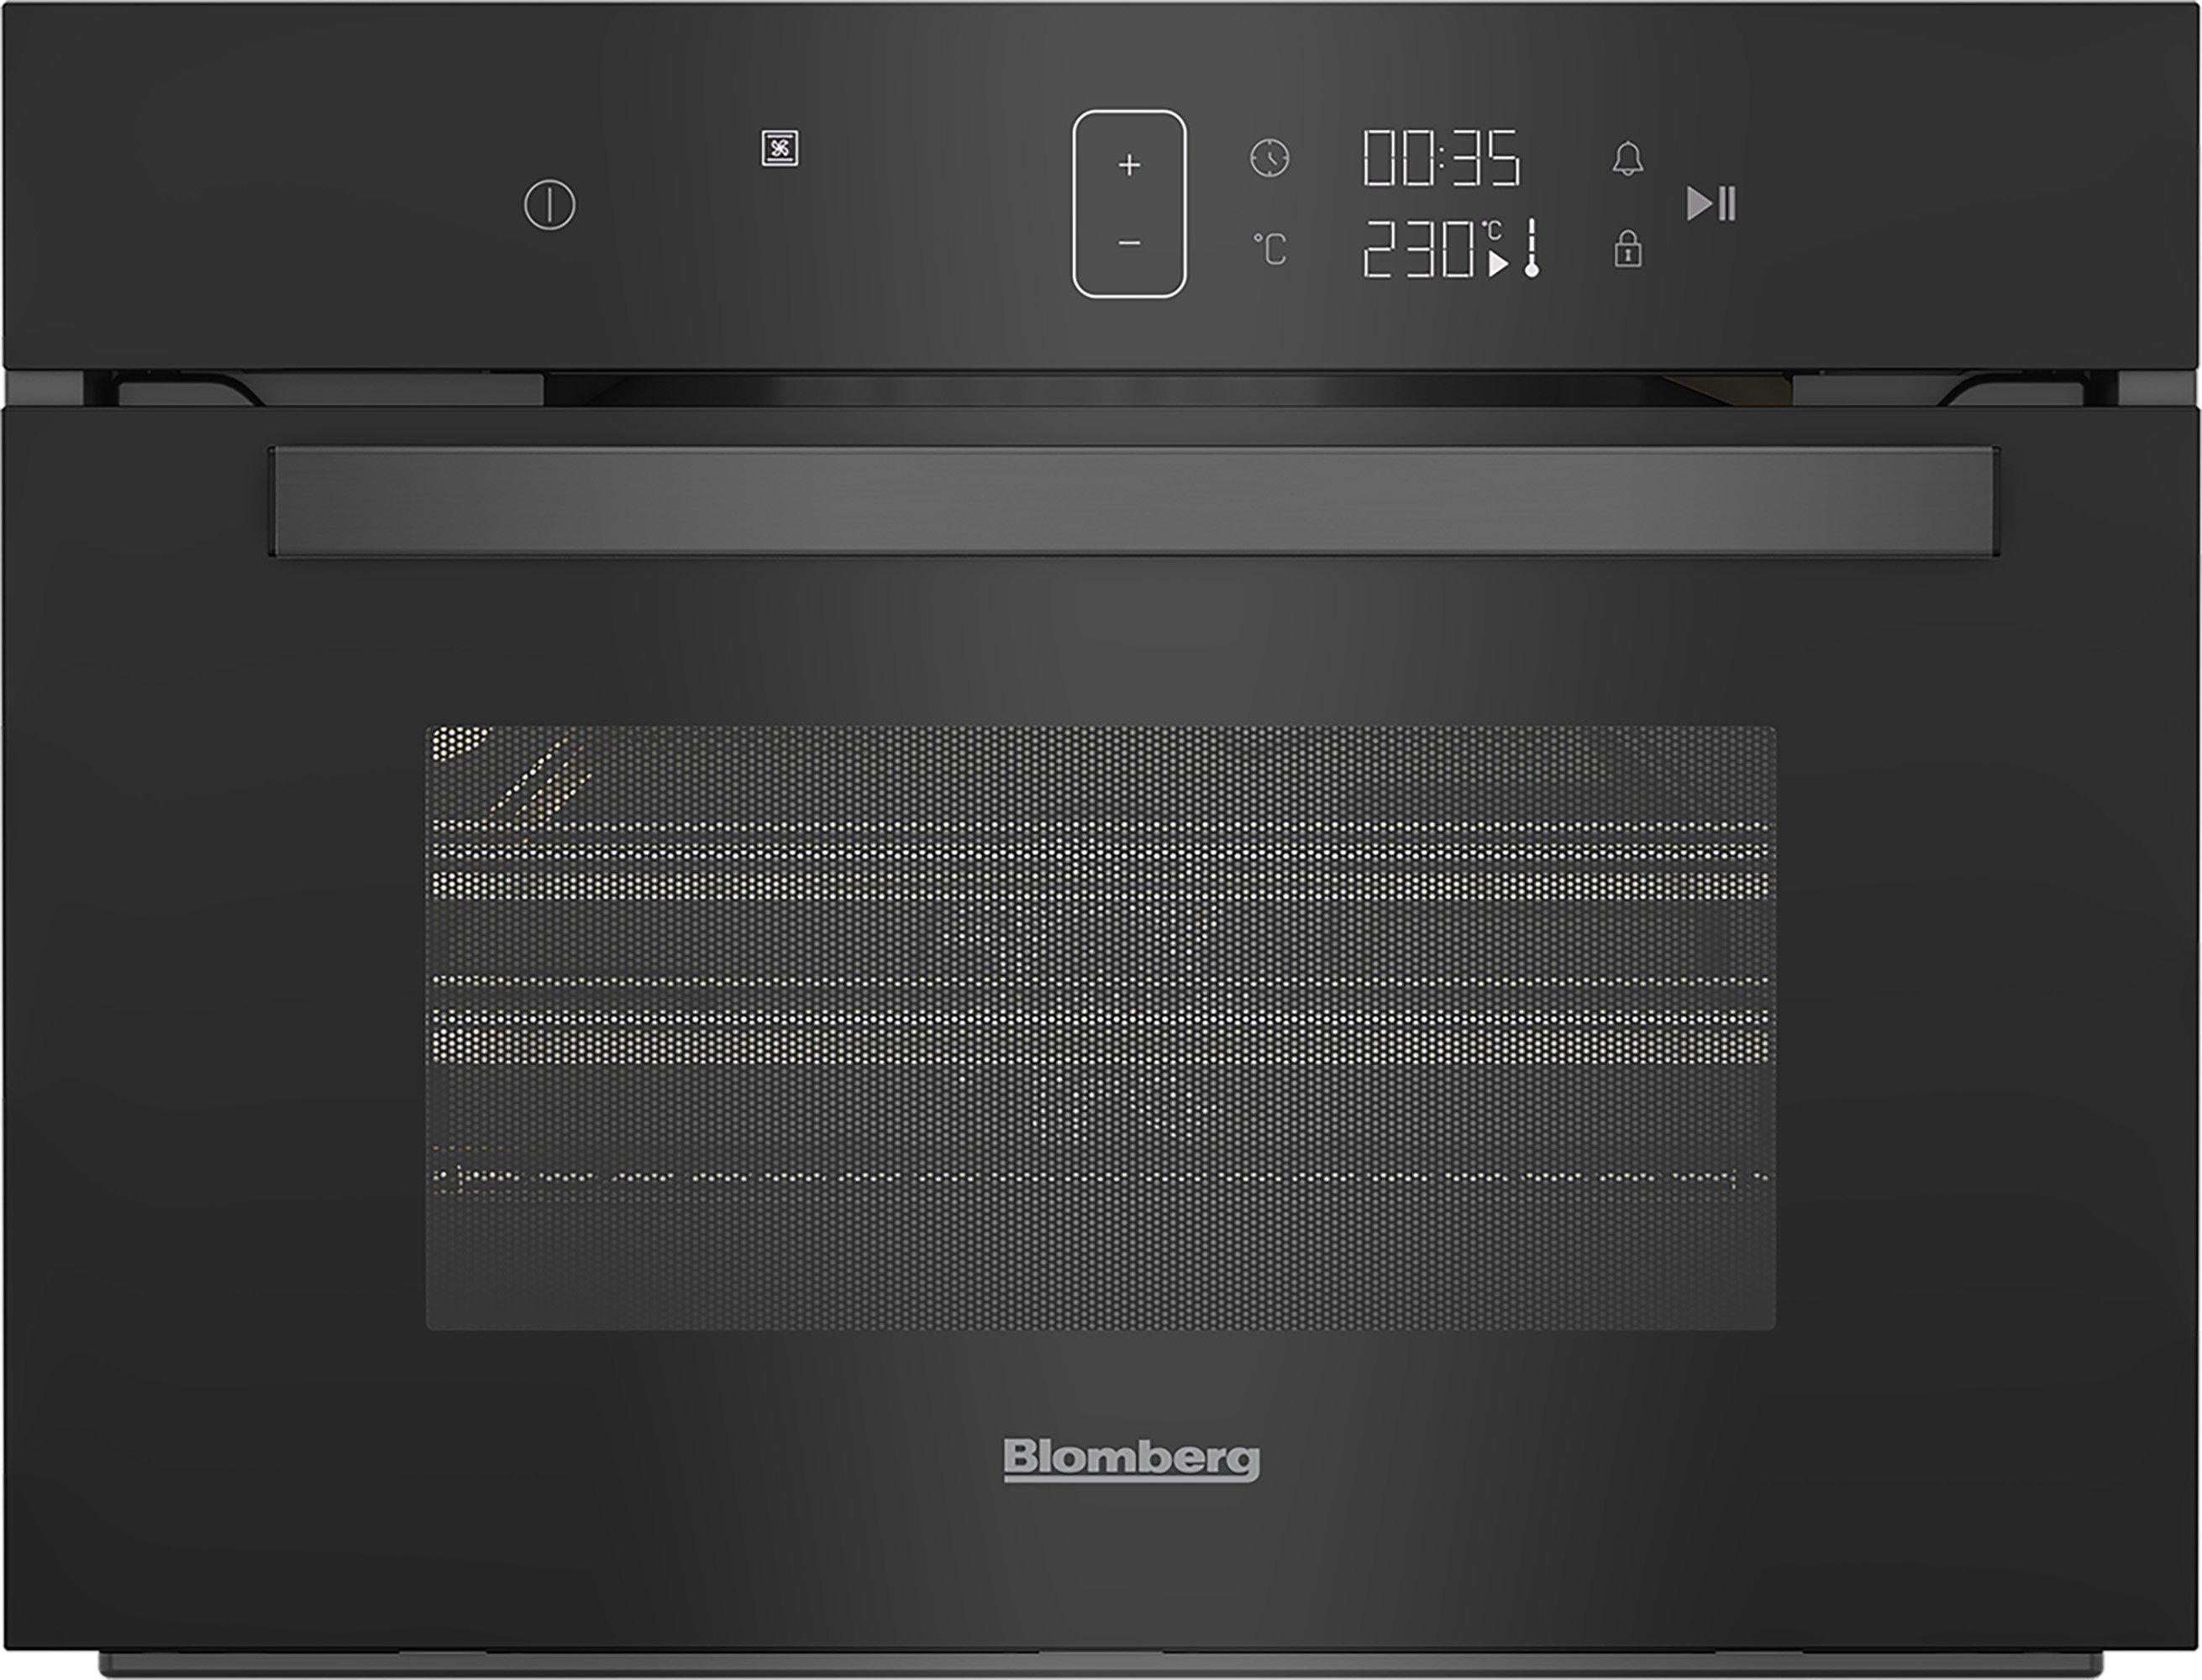 Blomberg ROKW8370B 59.4cm Built In Compact Microwave Oven - Black